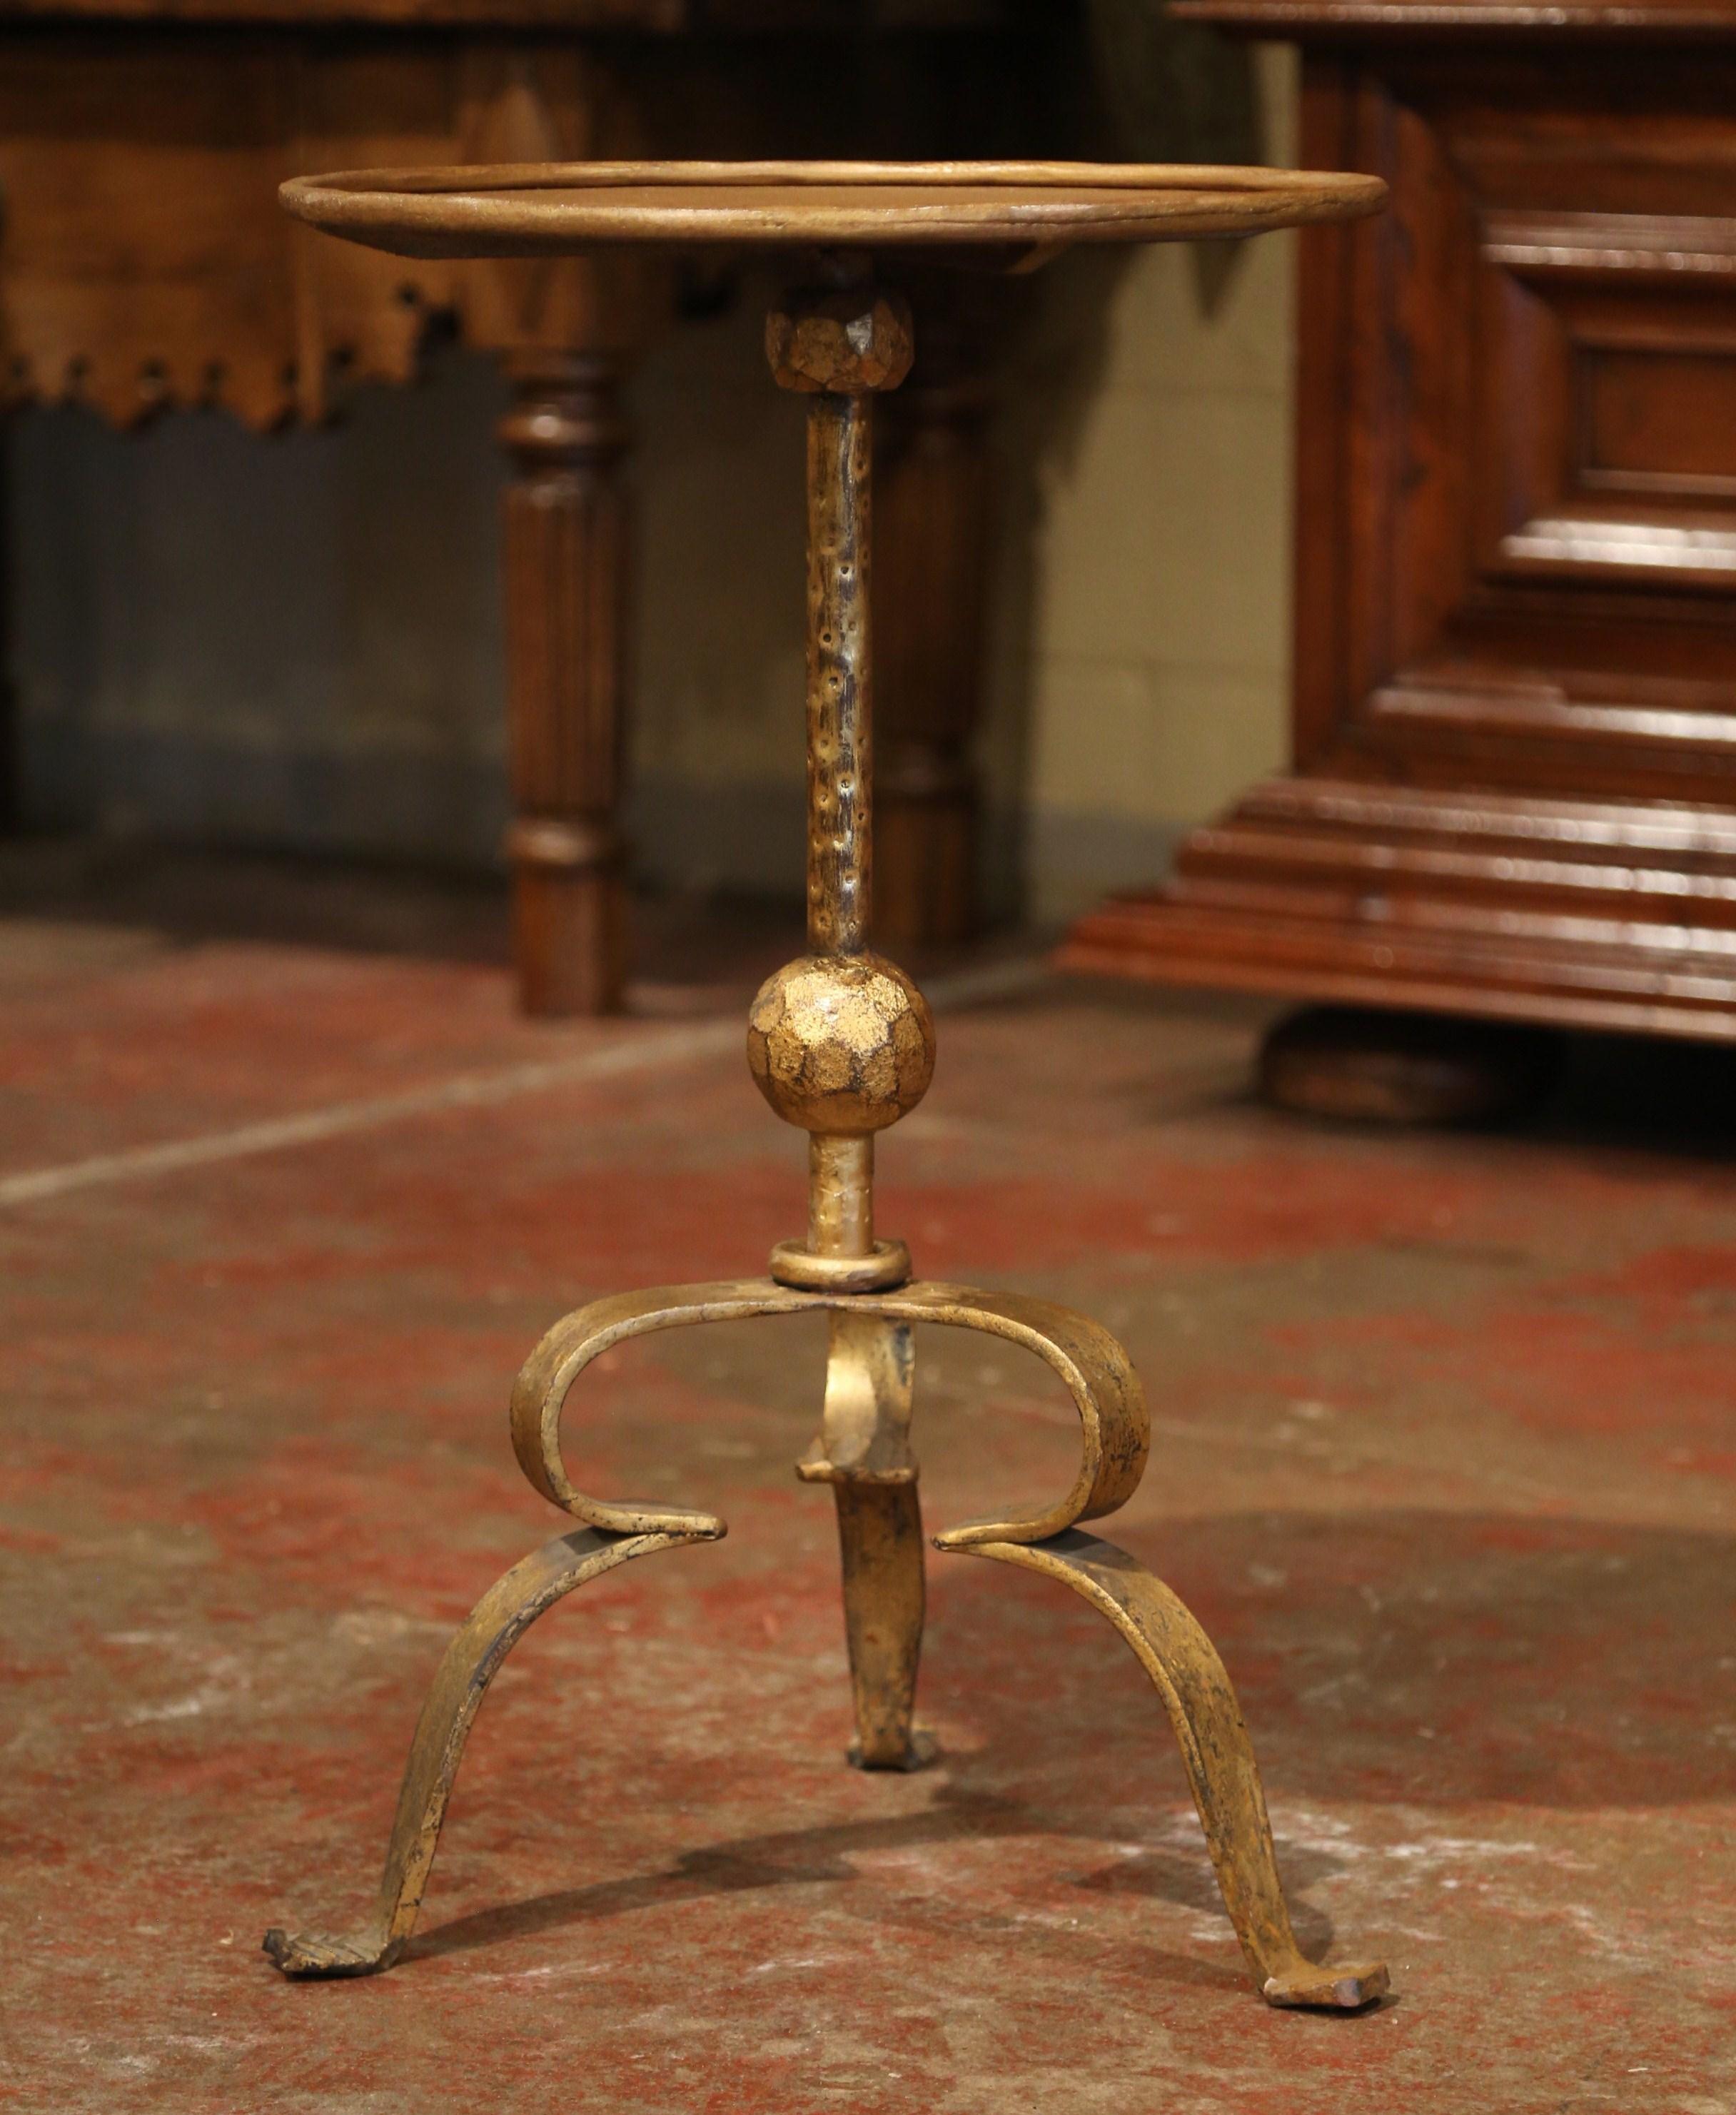 This elegant, antique pedestal table was crafted in Southern France, circa 1920. The intricate martini table features a forged central pedestal stem embellished with a central decor over three hammered scroll feet. The serving table is topped with a